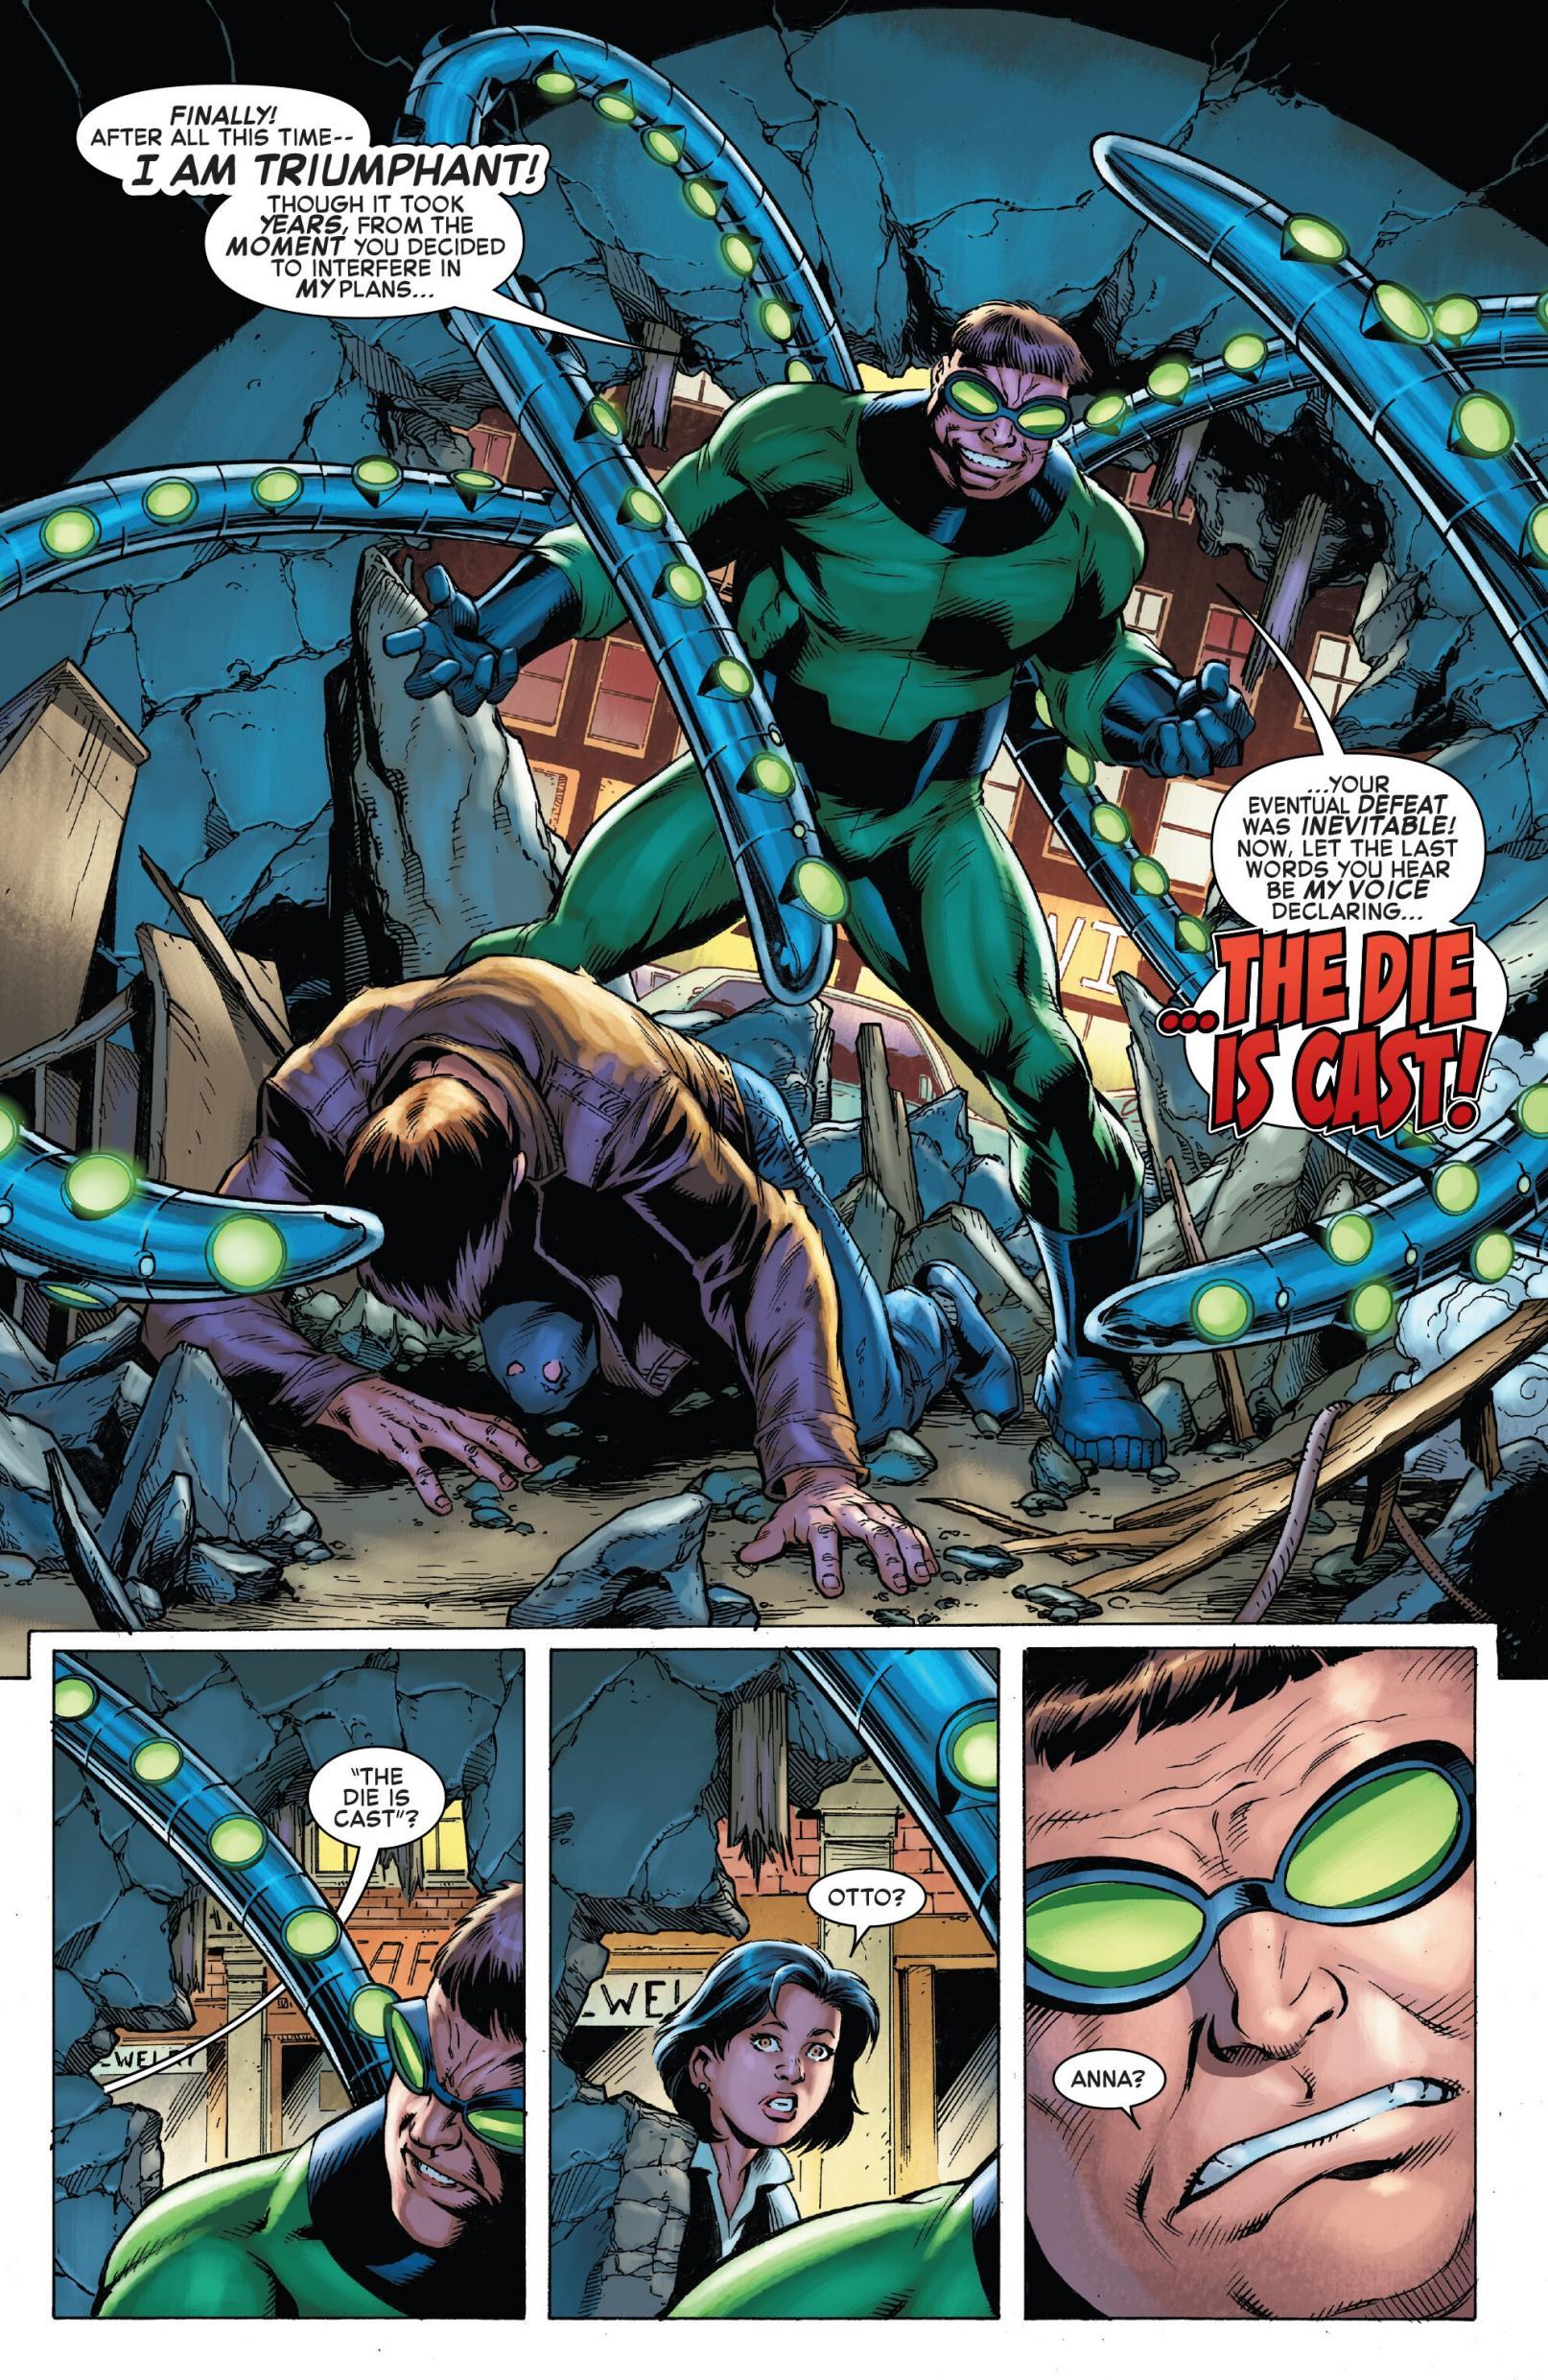 Profiles in Villainy #2 – Doctor Octopus